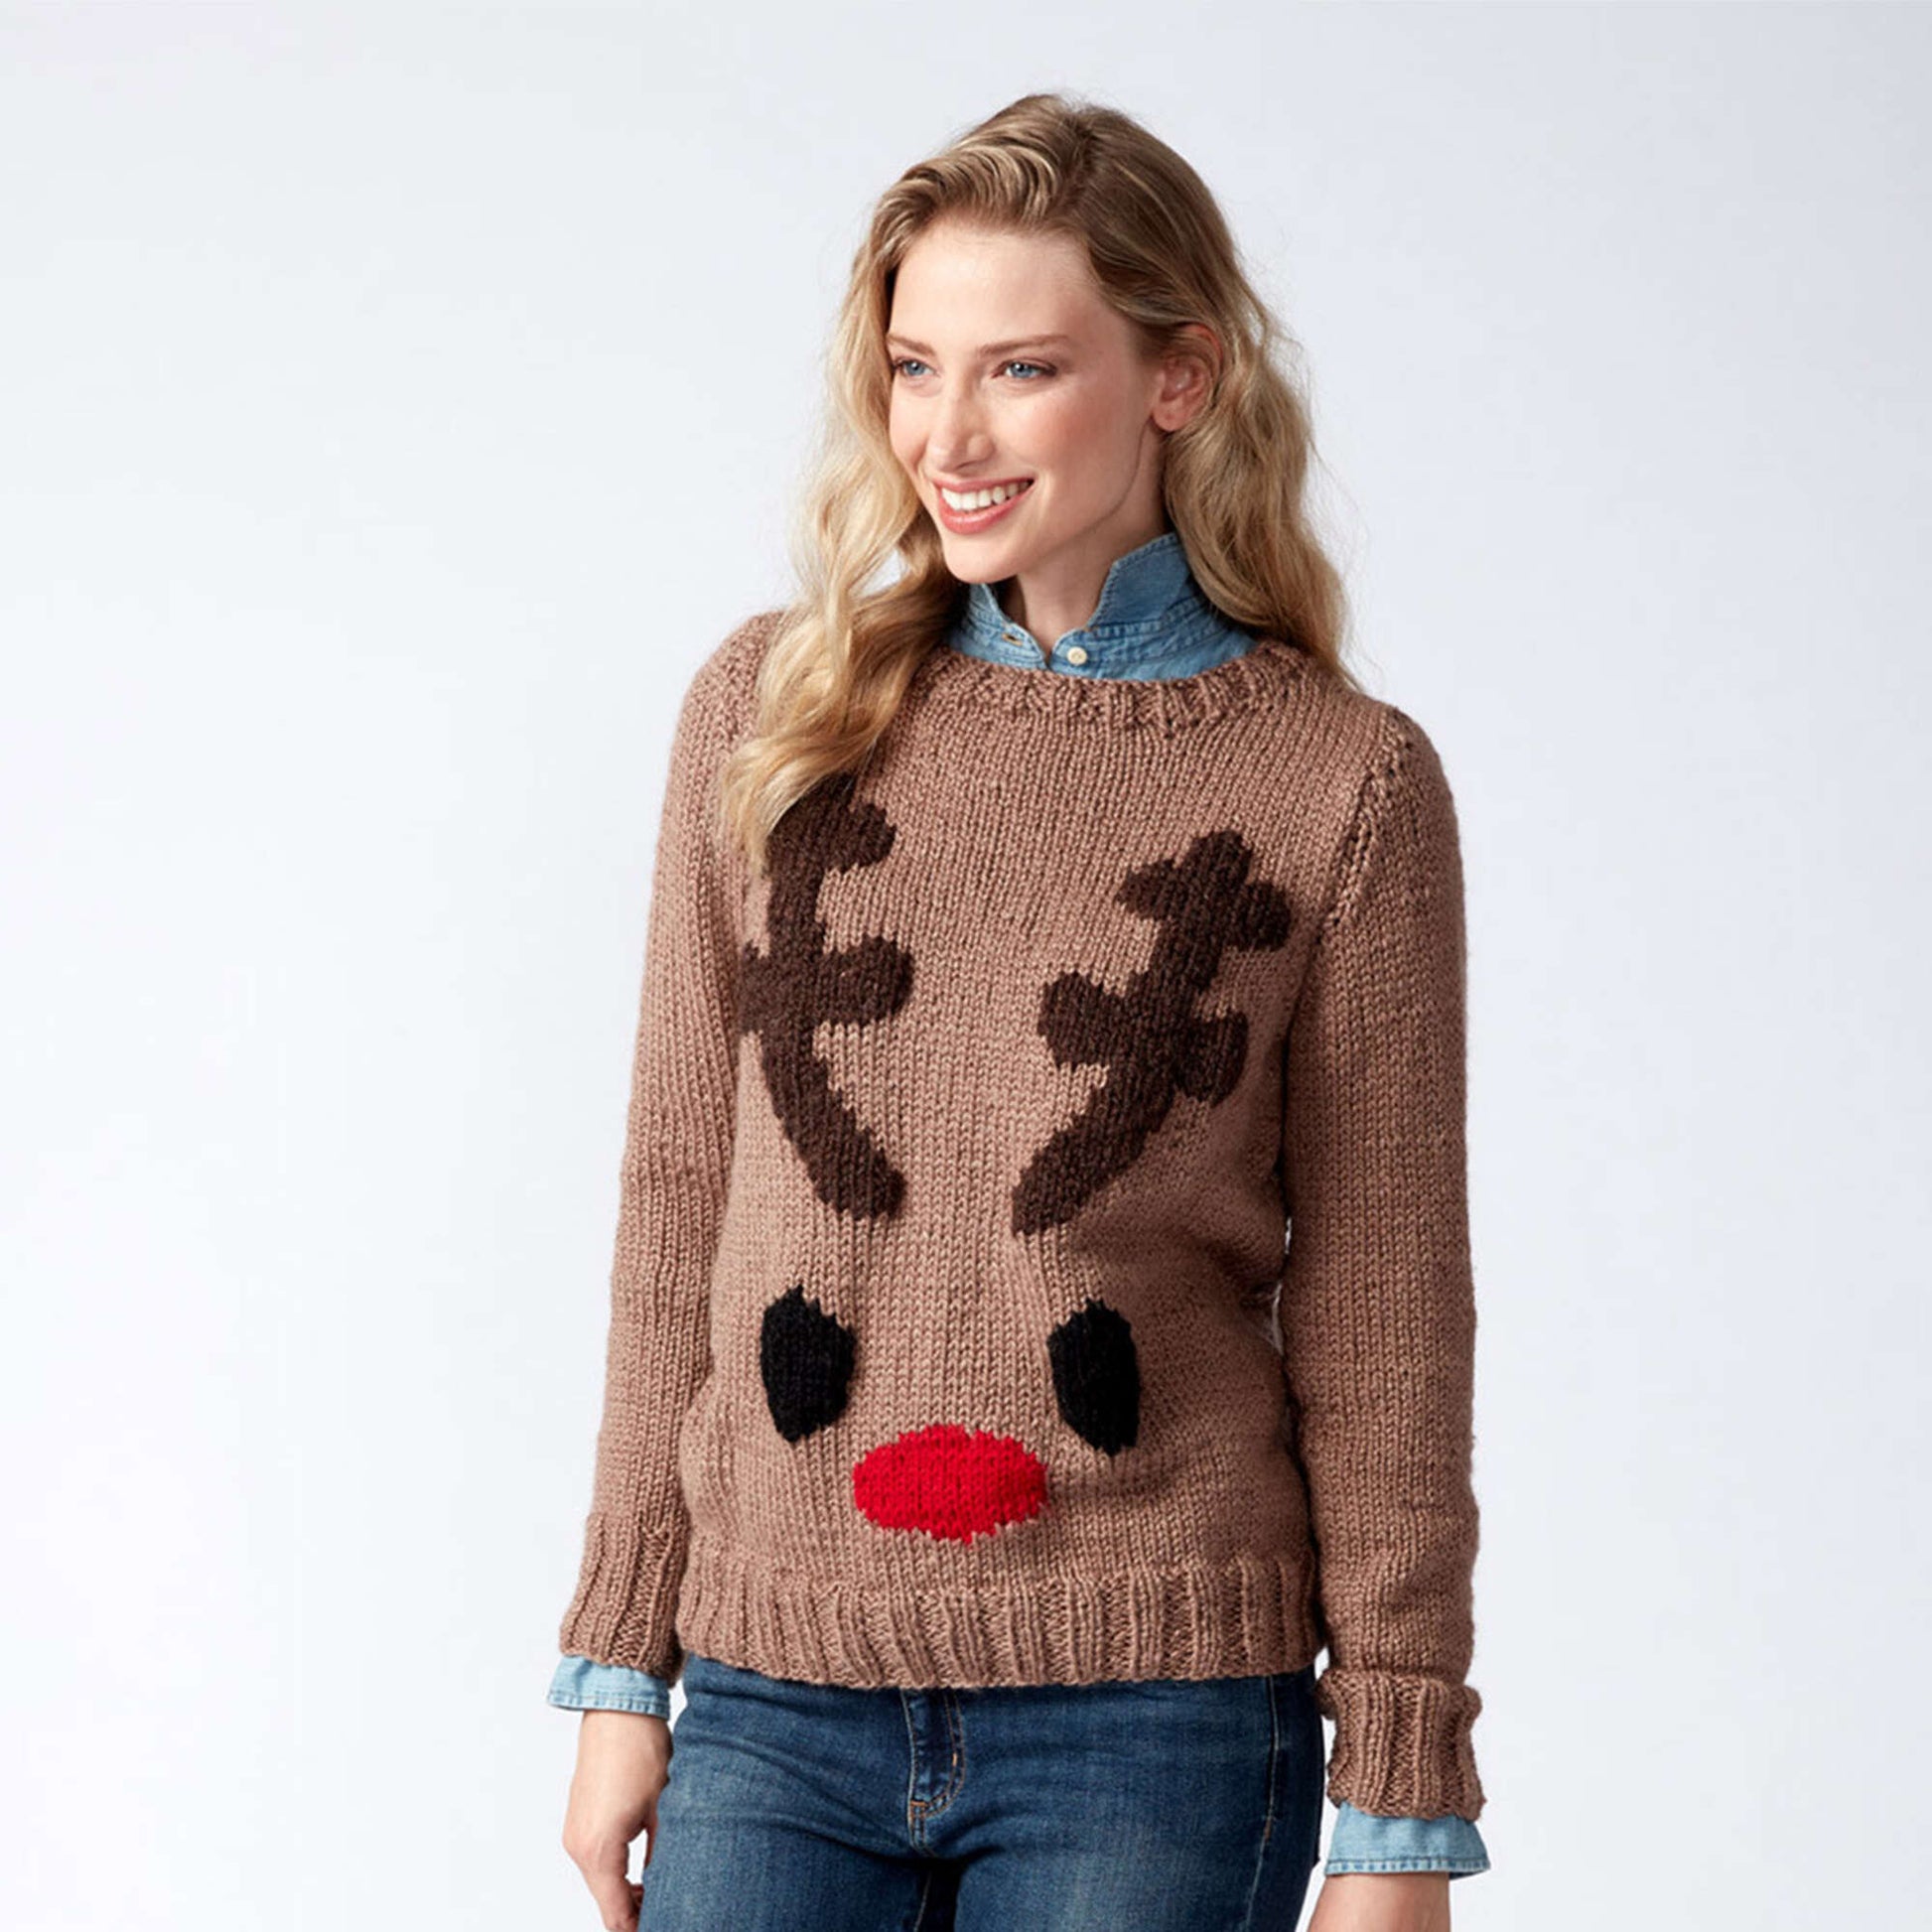 Free Patons Reindeer Knit Holiday Sweater Pattern